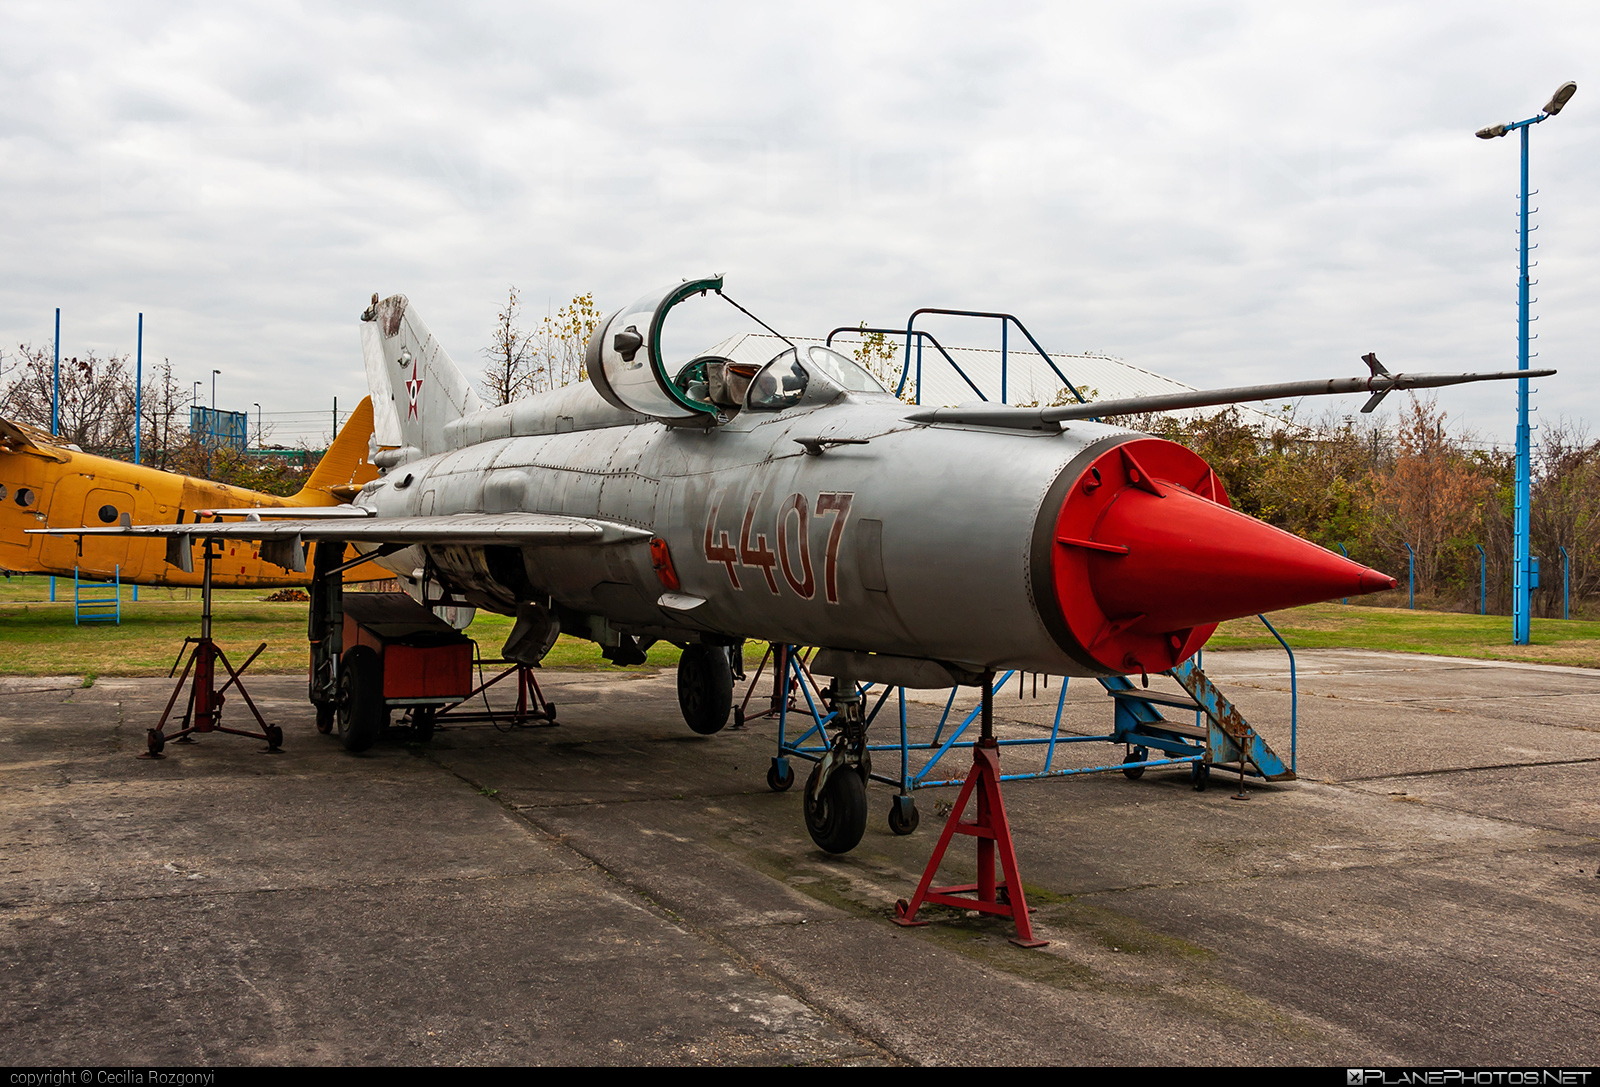 Mikoyan-Gurevich MiG-21MF - 4407 operated by Magyar Néphadsereg (Hungarian People's Army) #hungarianpeoplesarmy #magyarnephadsereg #mig #mig21 #mig21mf #mikoyangurevich